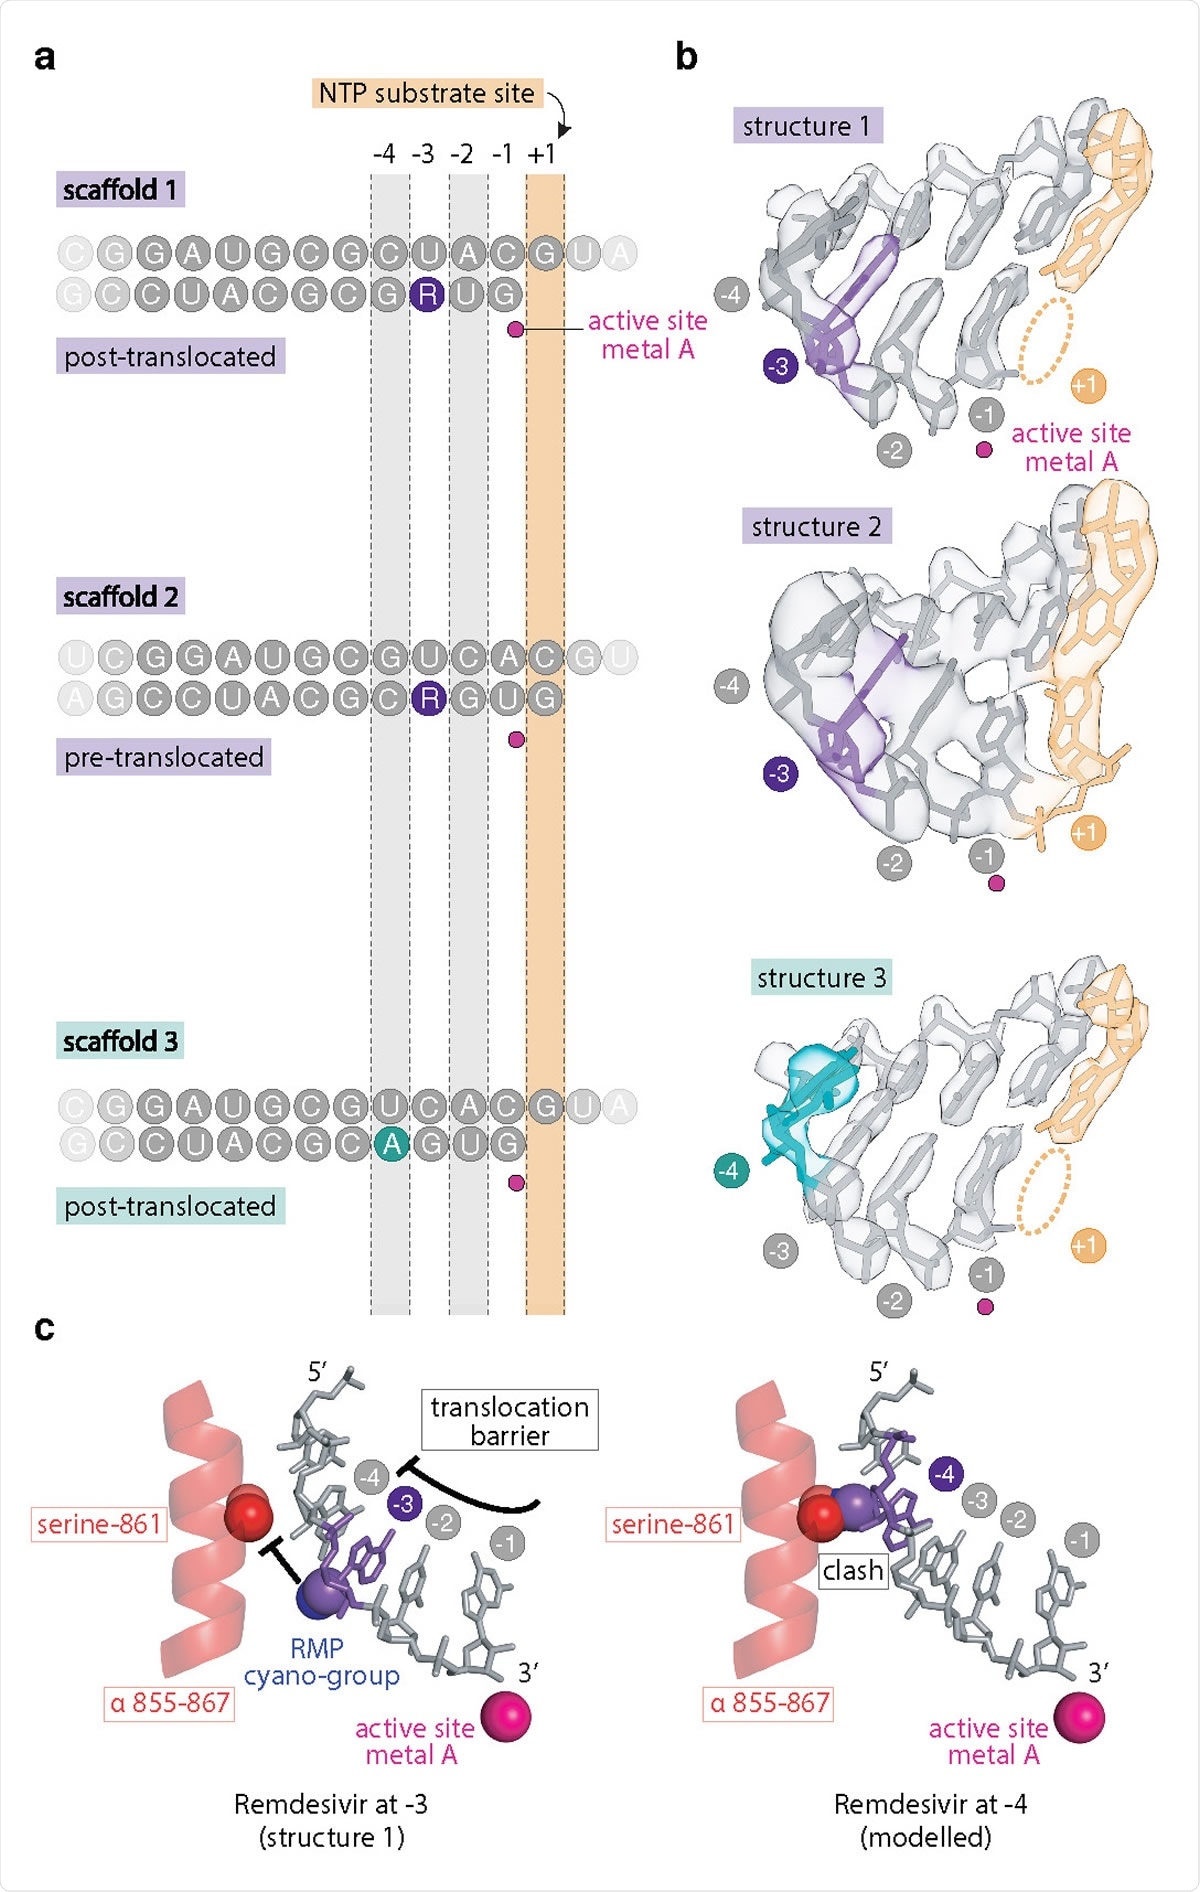 Structural analysis of remdesivir-induced RdRp stalling. a Position of RNA scaffolds 1–3 as observed in RdRp-RNA complex structures 1–3. Template and product strands are on the top and bottom, respectively. b Cryo-EM density of RNA in the active center of structures 1–3. The active site metal ion was modelled30 and is shown as a magenta sphere. c The C1’-cyano group of the RMP ribose moiety (violet) is accommodated at position –3 (left), but would clash with the side chain of nsp12 residue serine-861 (red) at position –4 (right). Spheres indicate atomic van der Waals surfaces.